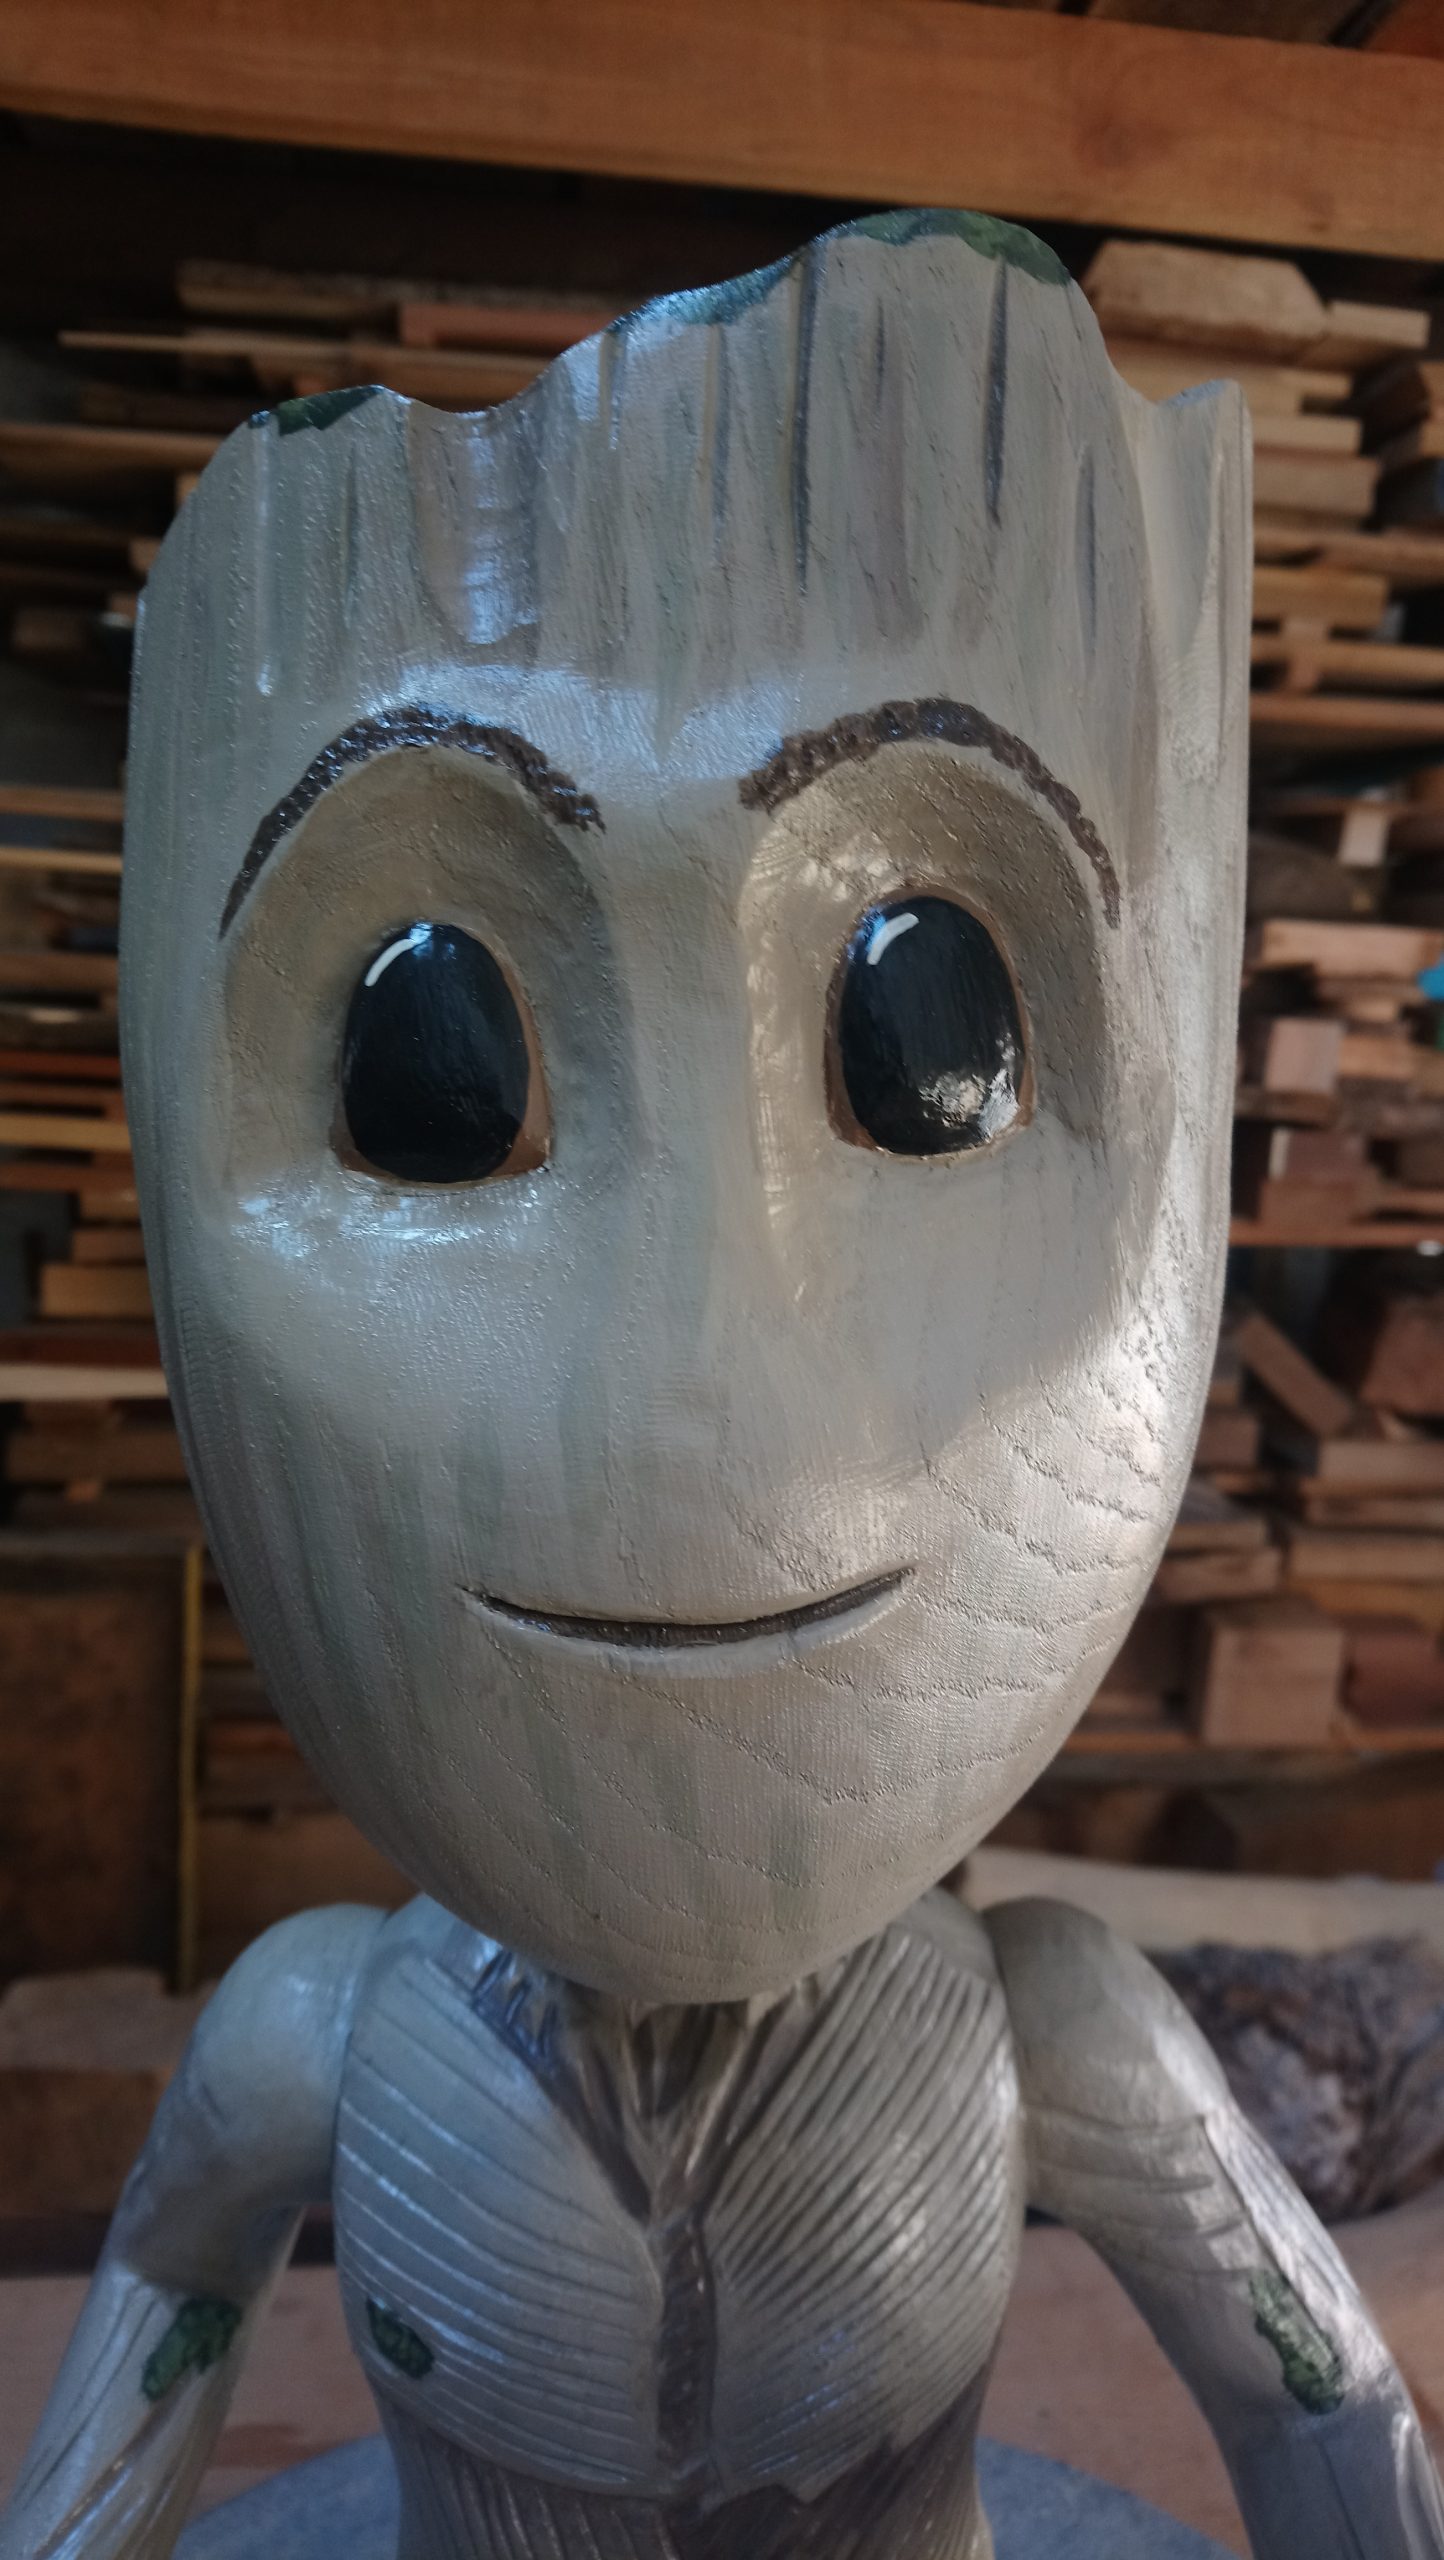 The face of the character 'Groot' when young, from Marvel's 'Guardians of the Galaxy'